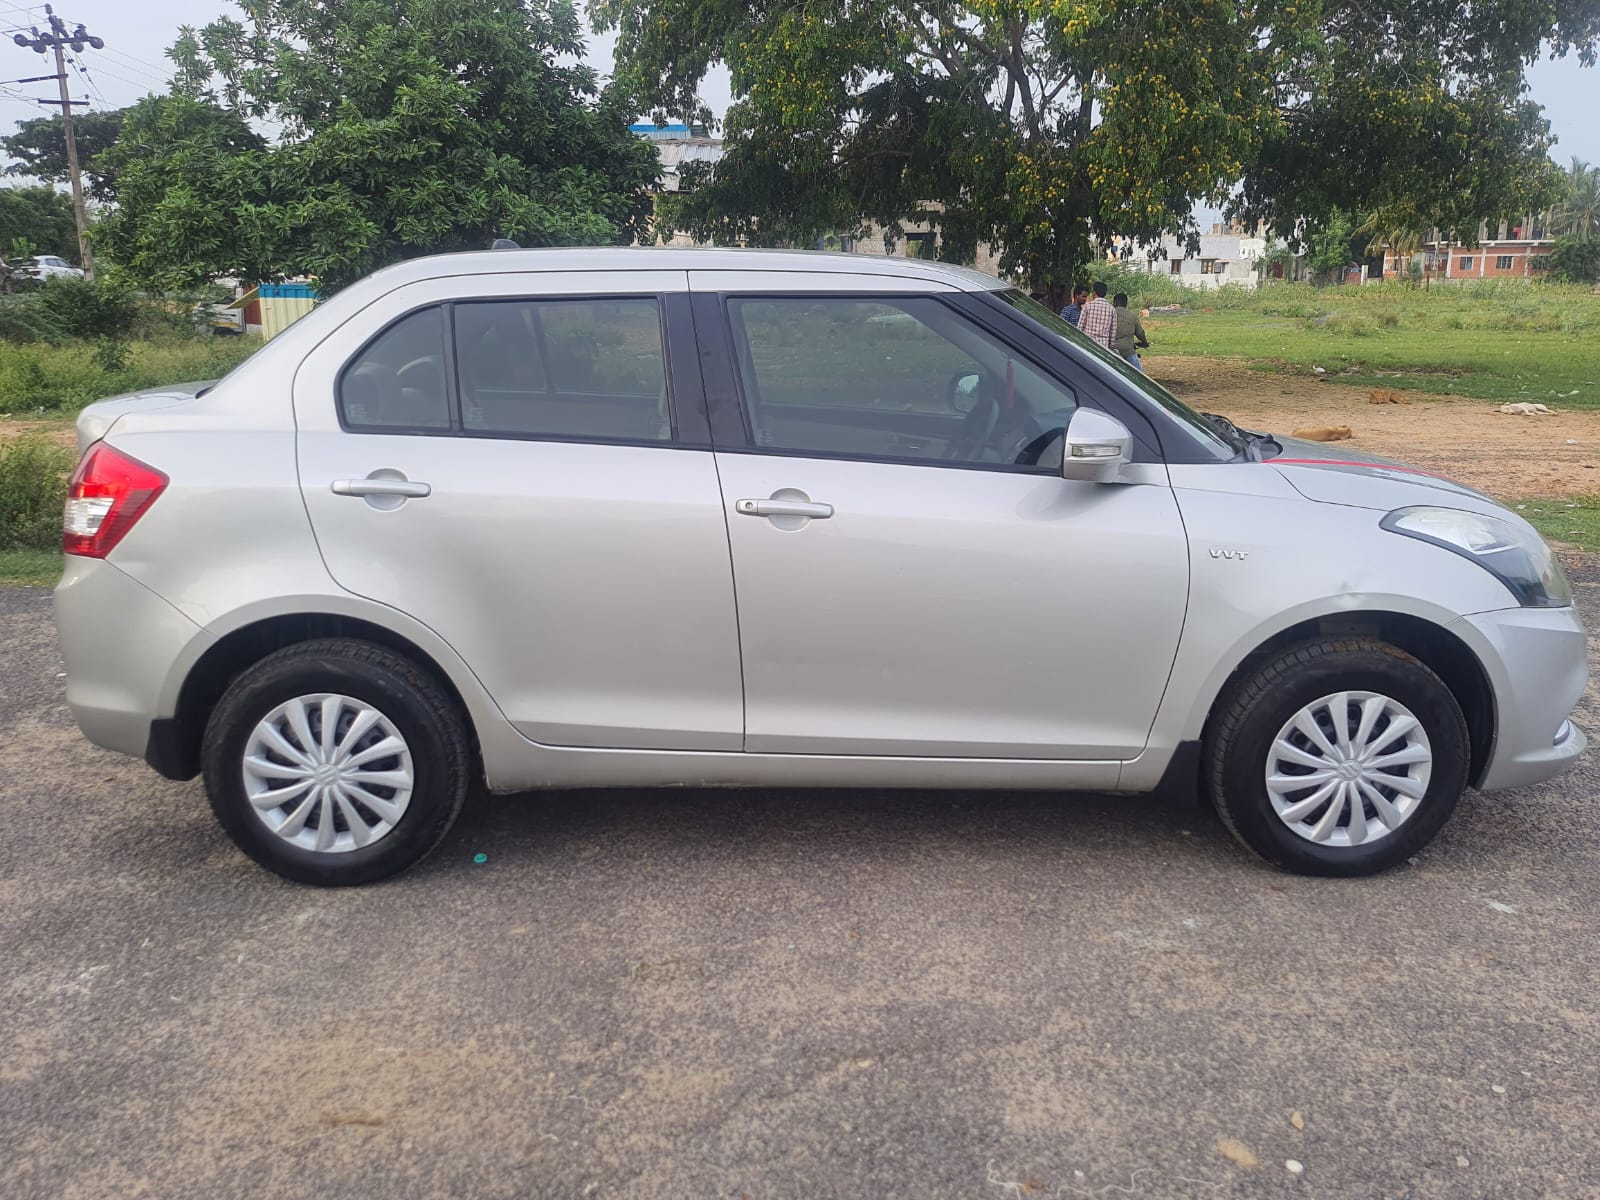 4221-for-sale-Maruthi-Suzuki-DZire-Petrol-First-Owner-2015-TN-registered-rs-525000